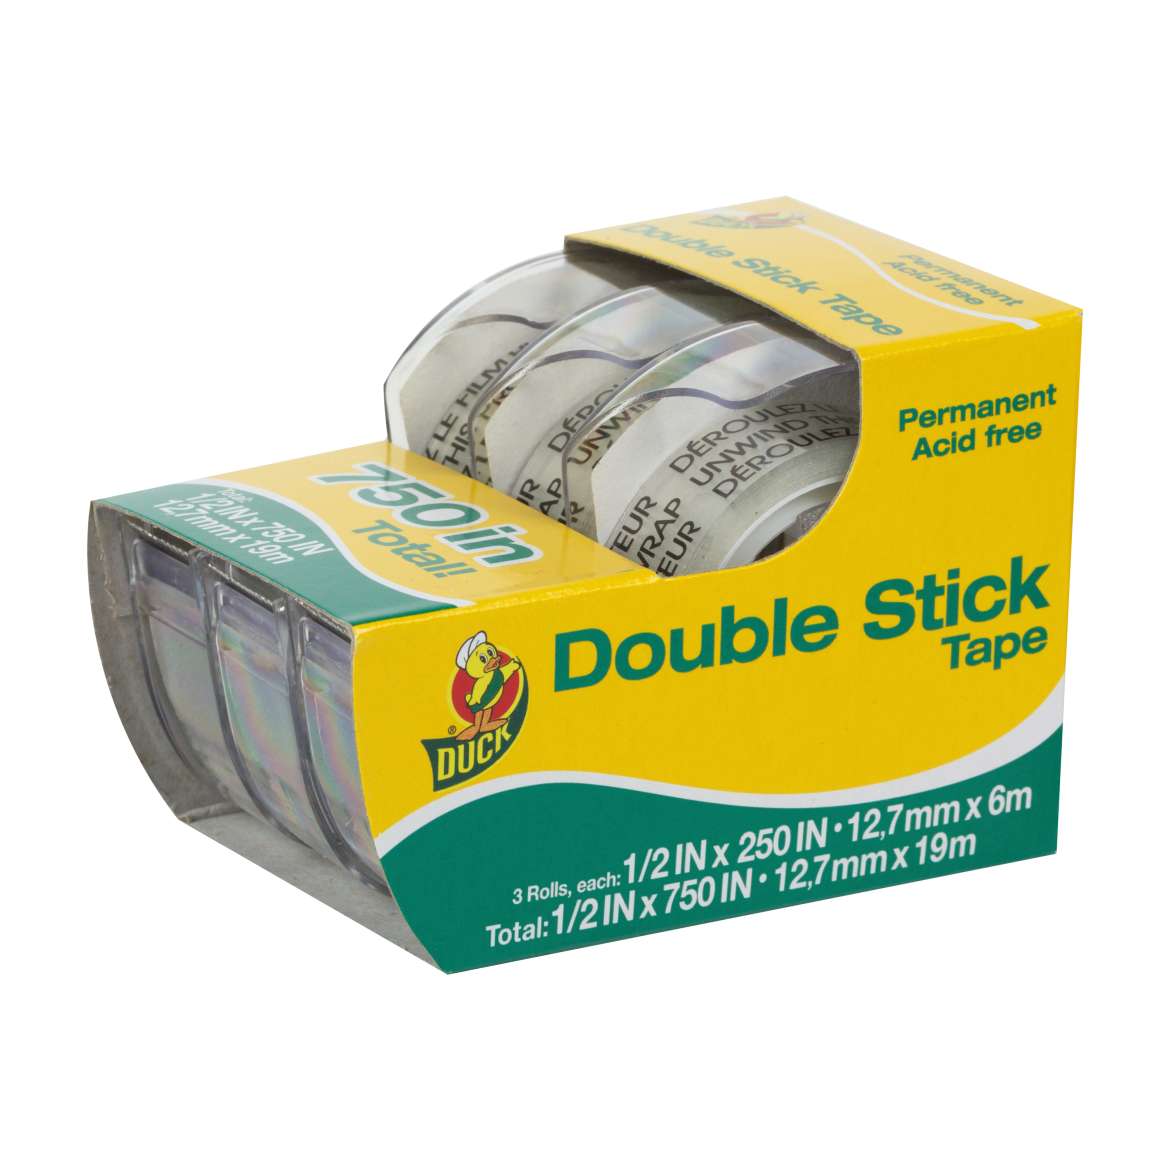 Double Stick Tape Image